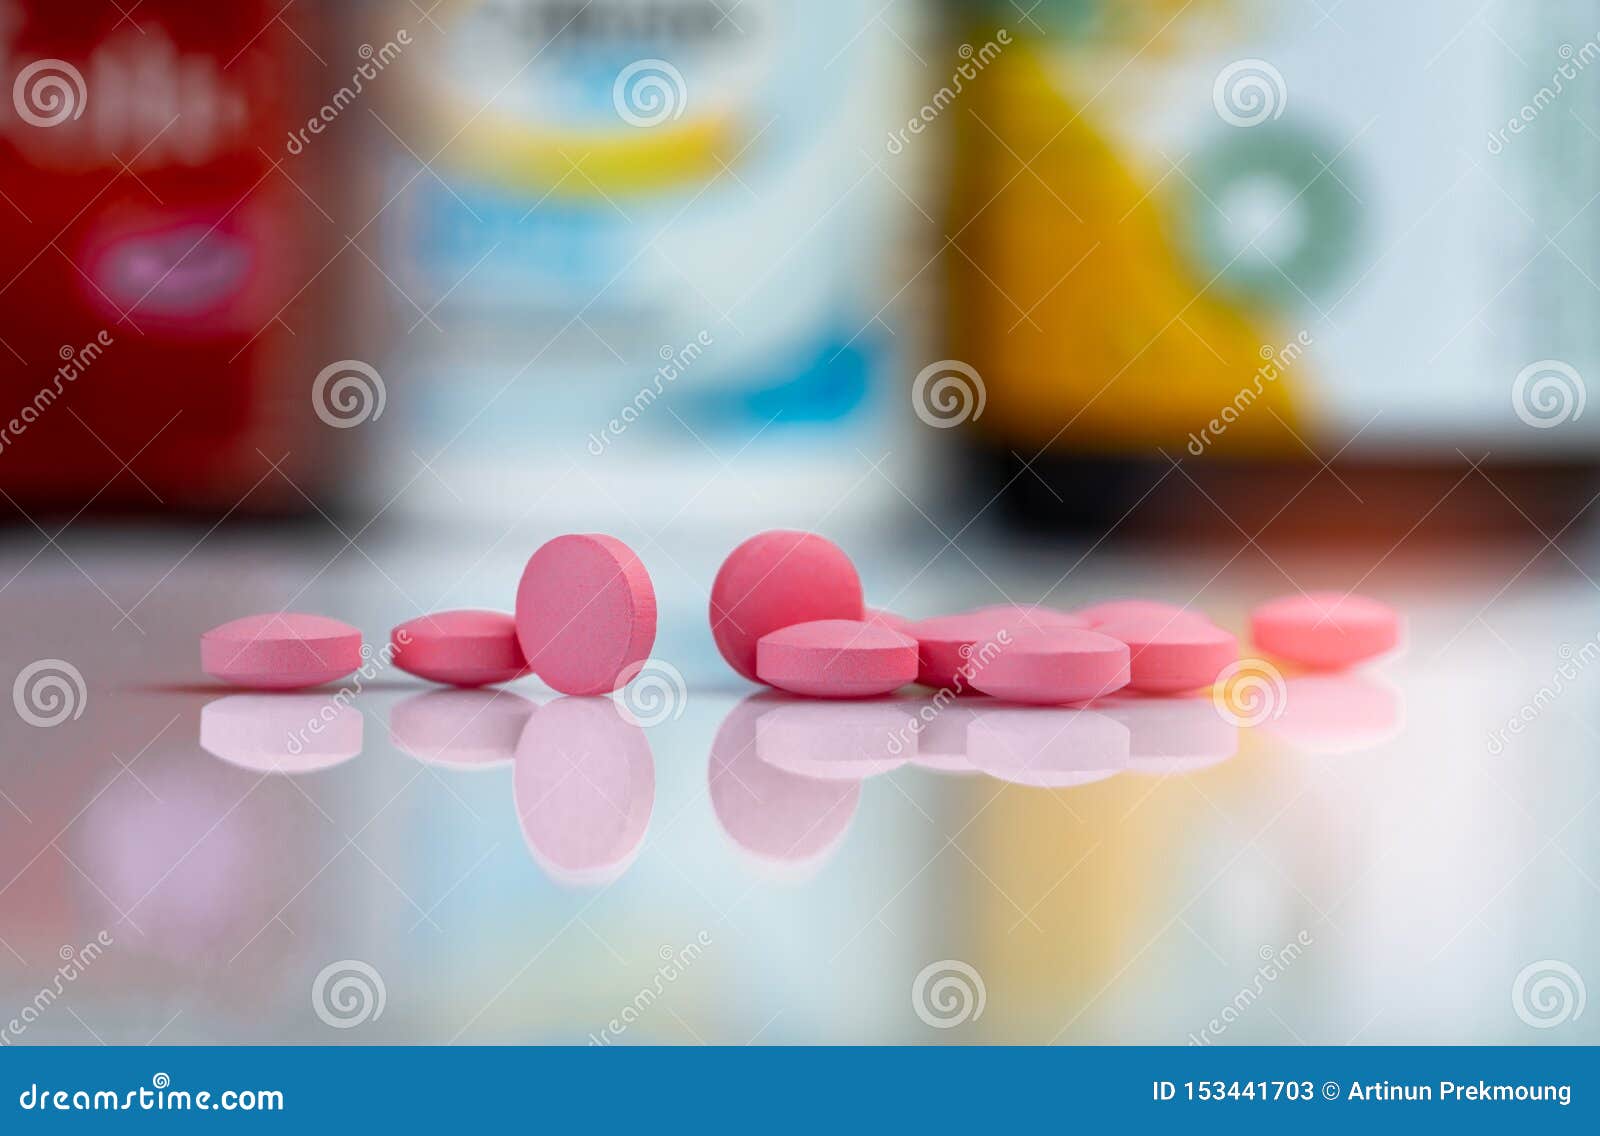 pink tablets pills on blurred background of drug box and drug bottle. vitamins and supplements tablets. pharmacy drugstore.